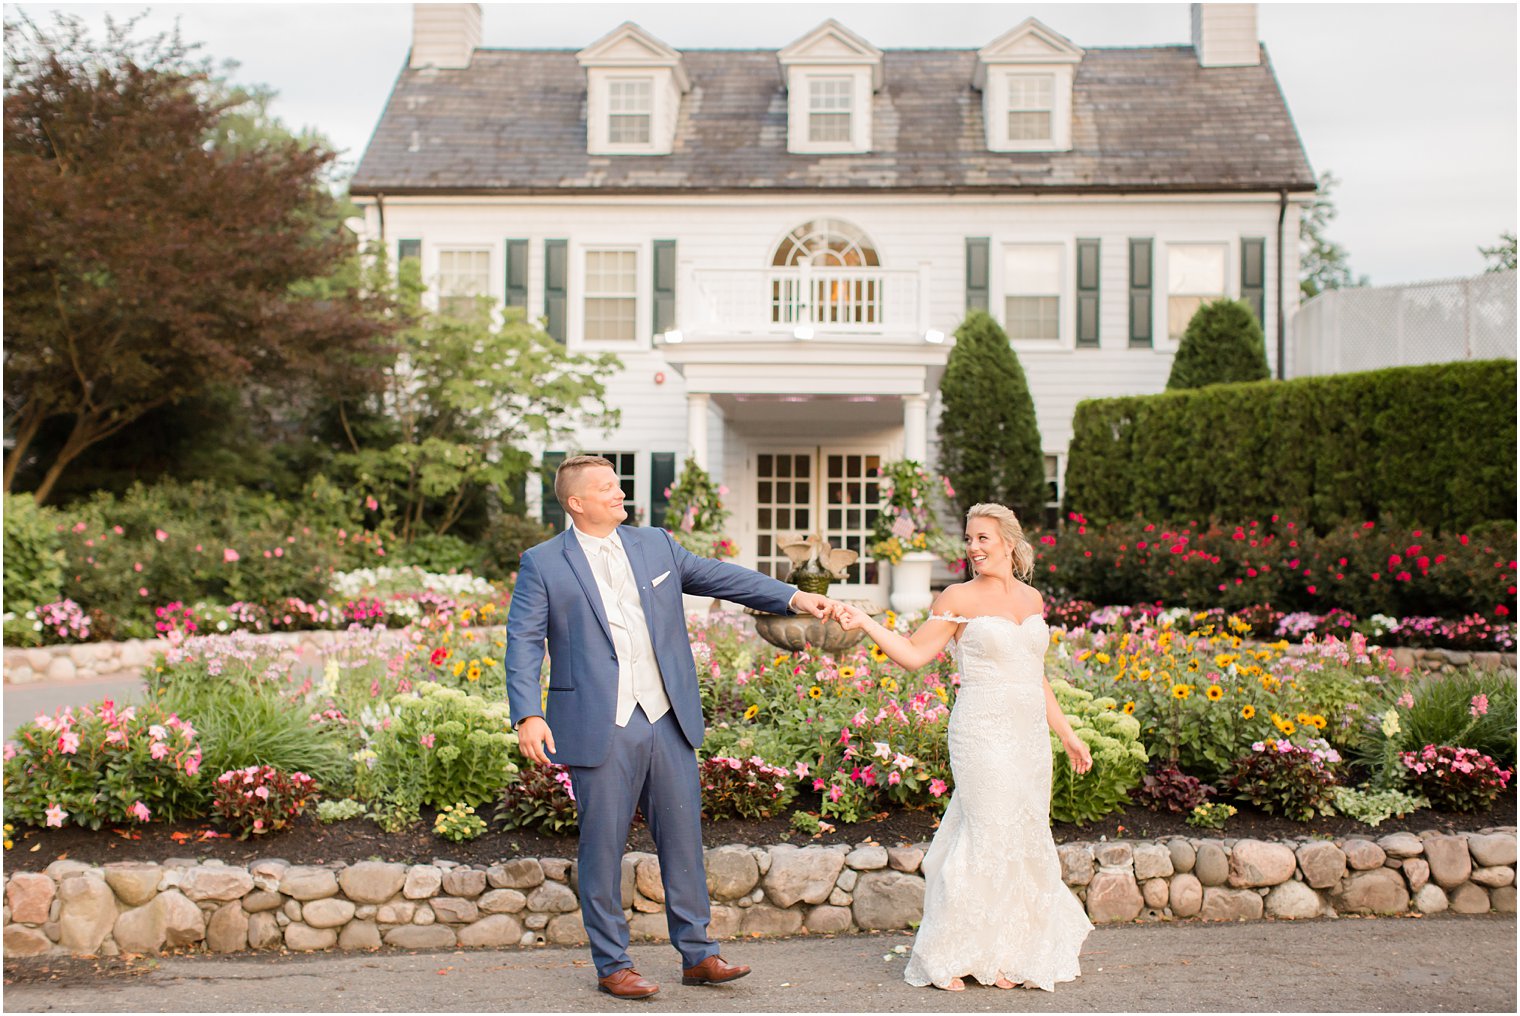 Golden hour portraits at The English Manor in Ocean, NJ